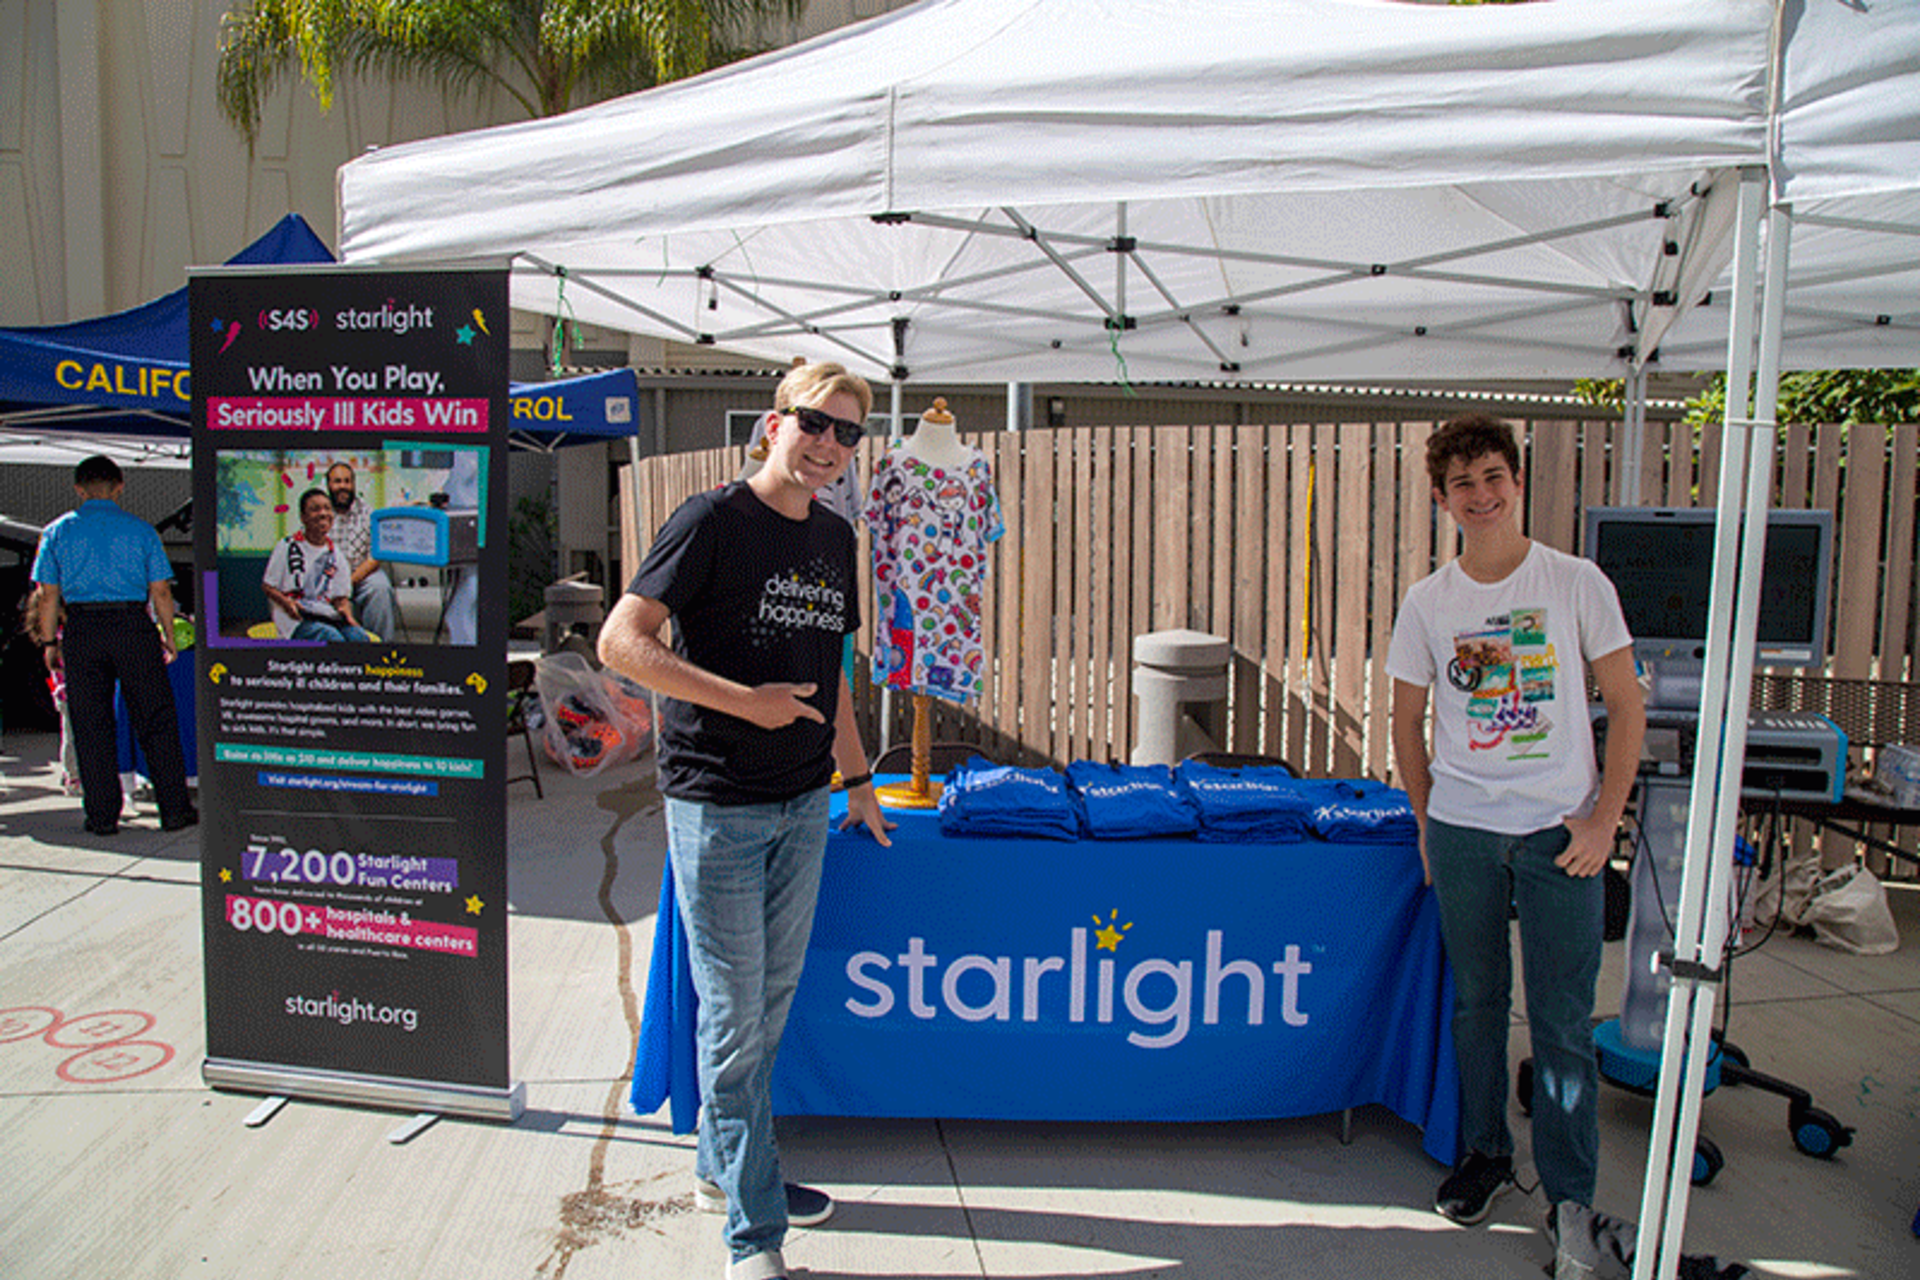 Starlight's booth at the health fair